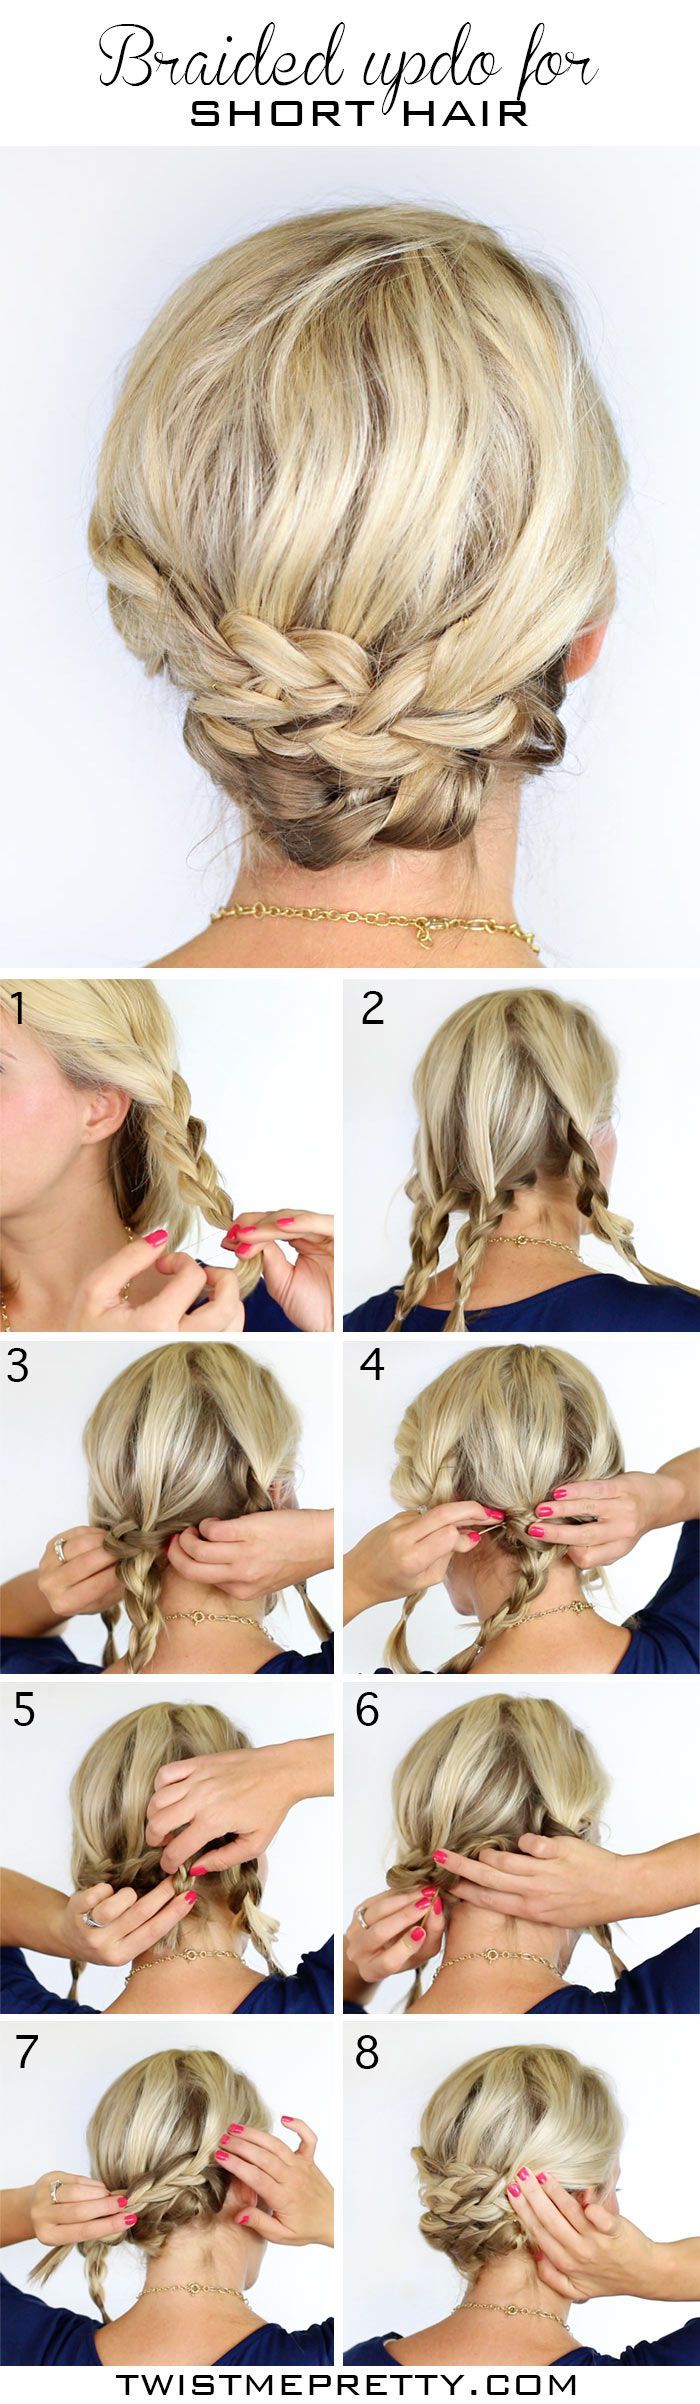 The blogger behind this pretty braided style says it’s for short hair, but I t